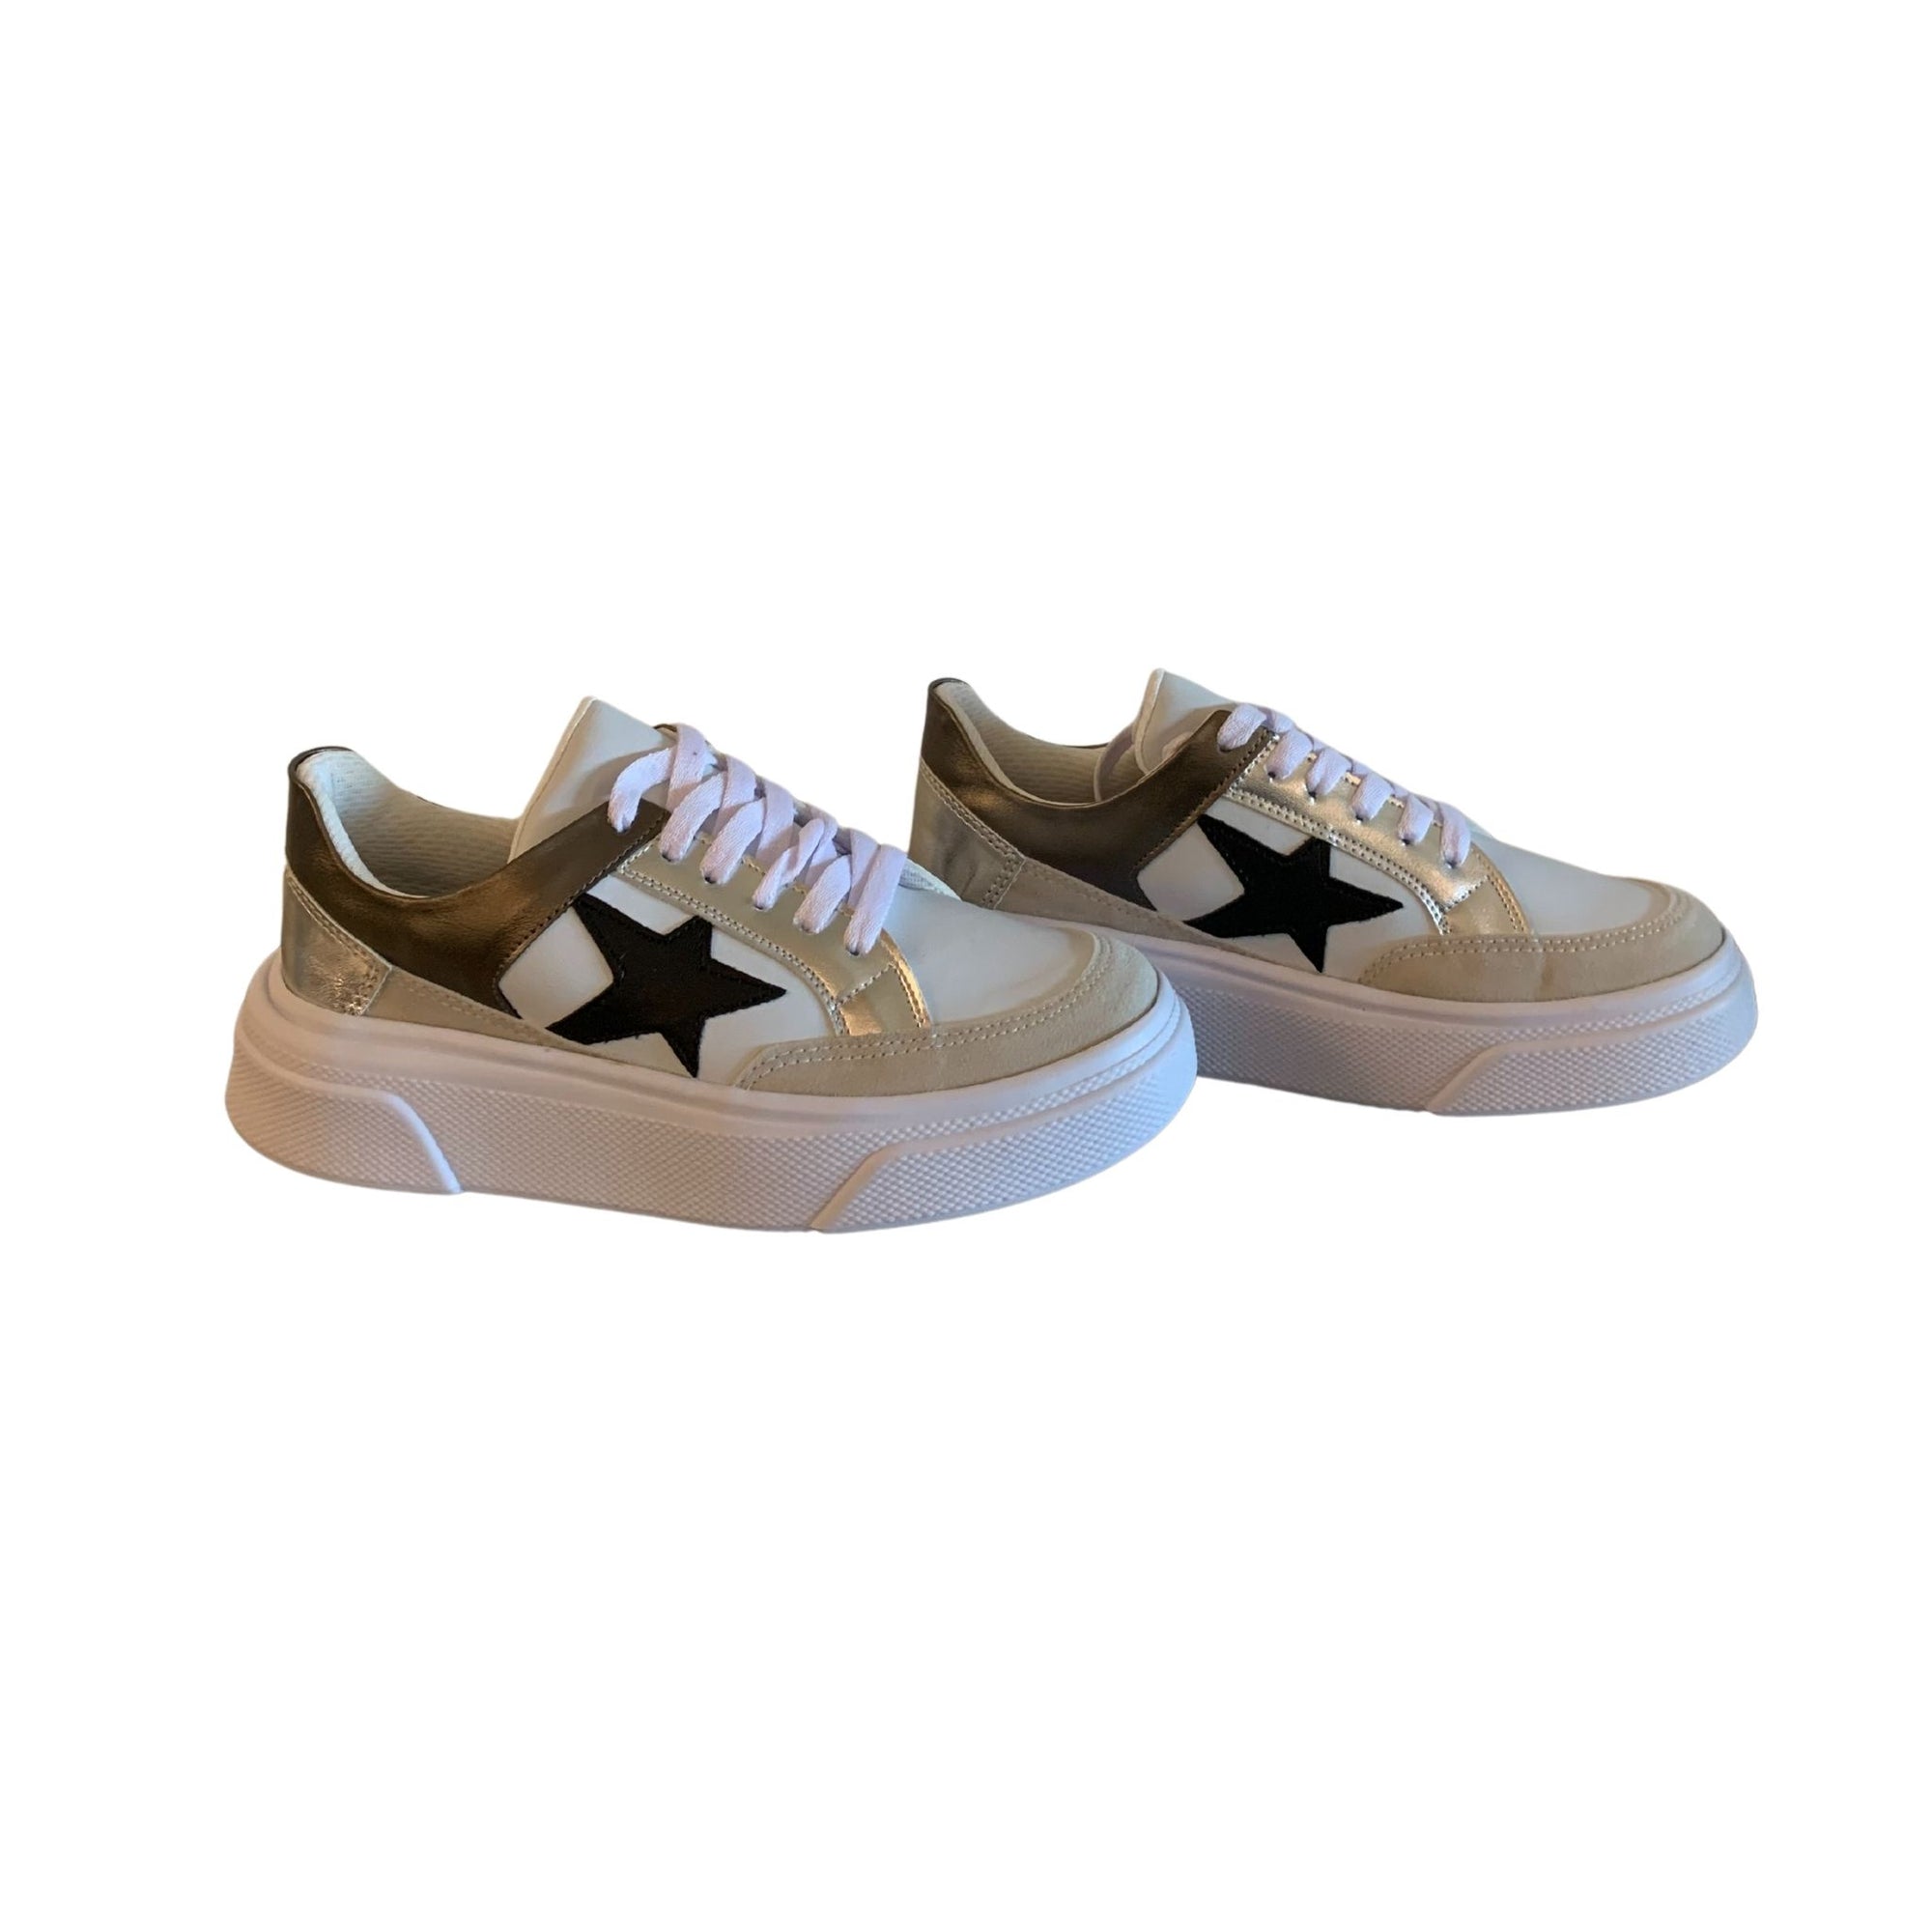 North Star Sneakers